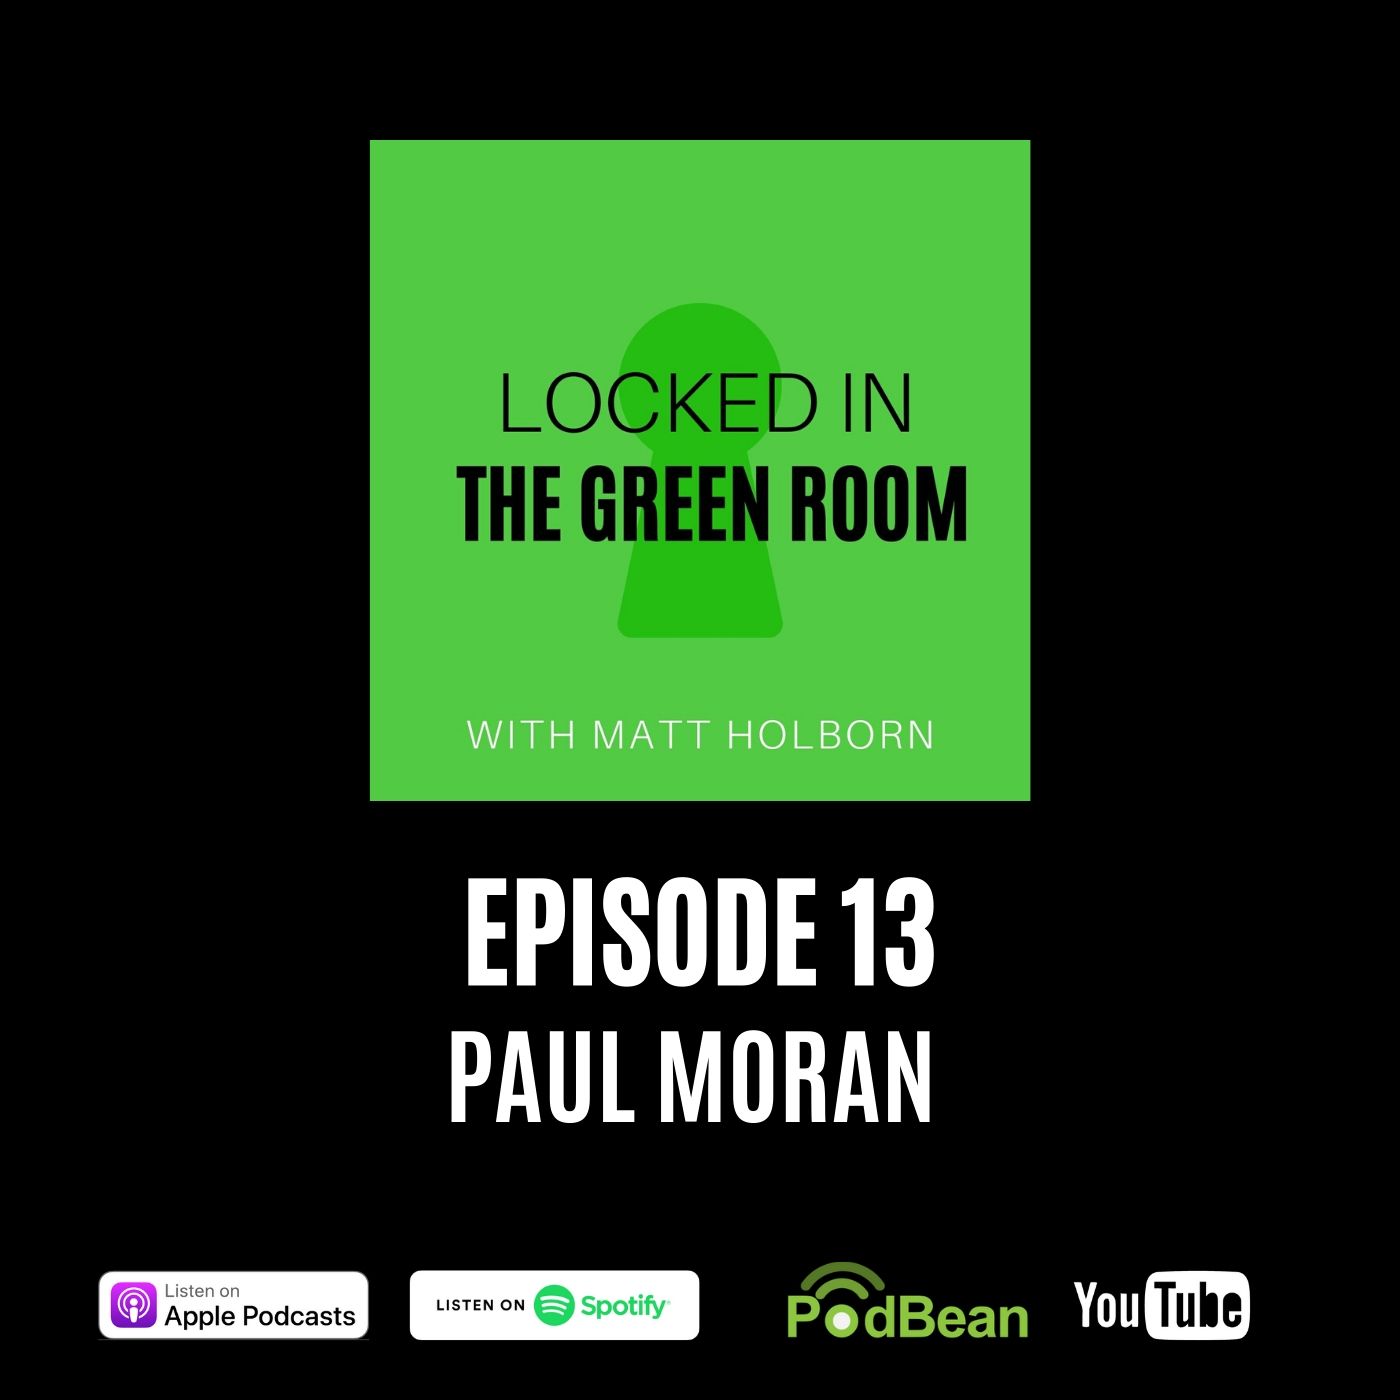 #13 Paul Moran: Musical director for Van Morrison on staying productive and positive on lockdown